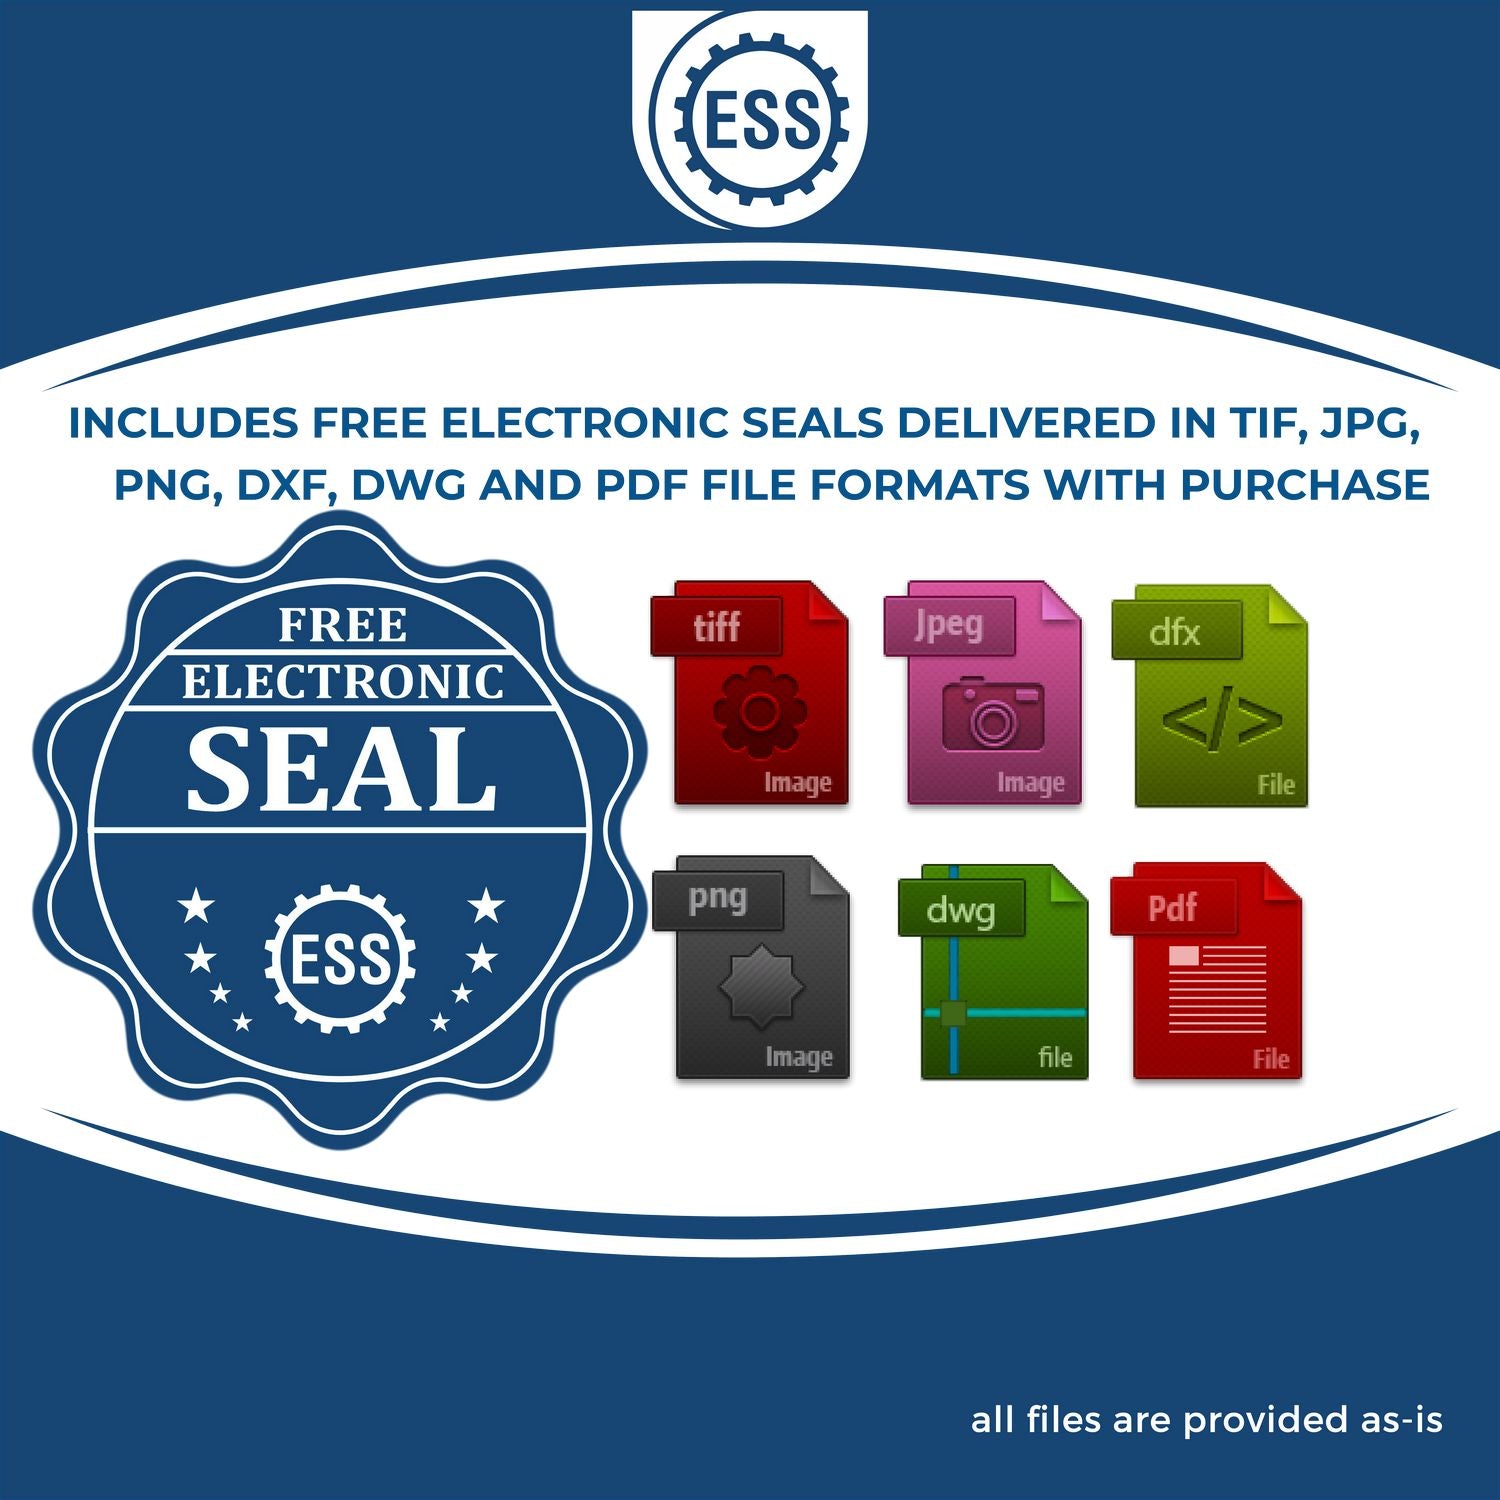 An infographic for the free electronic seal for the Self-Inking South Dakota PE Stamp illustrating the different file type icons such as DXF, DWG, TIF, JPG and PNG.